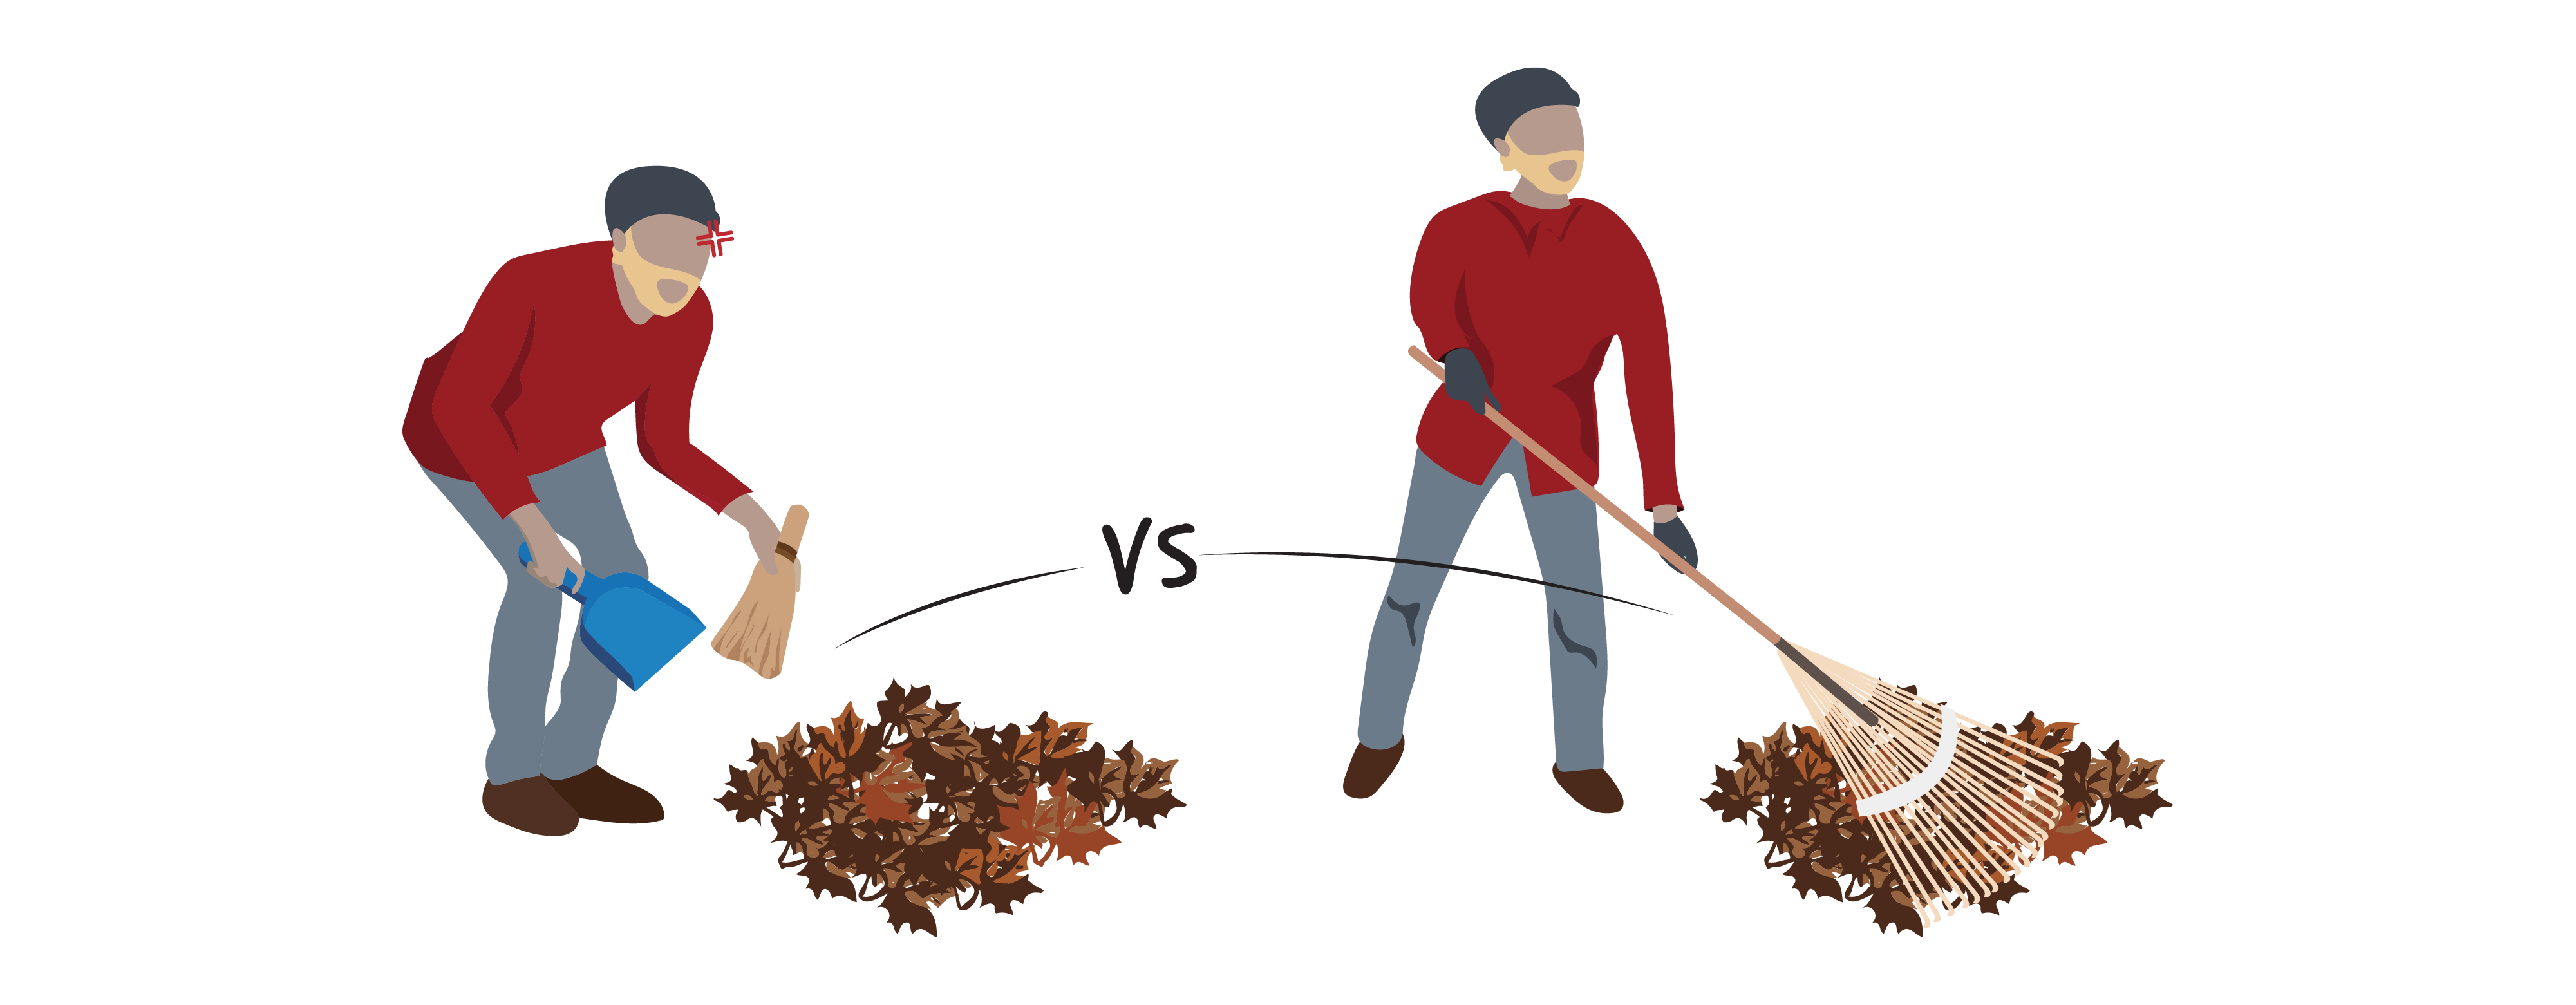 On the left, a man in a red sweater and grey pants is sweeping up leaves with a broom and a blue dust pan. Black arrow in between images with text versus. On the right, the same man is raking leaves while standing upright with long handled rake.